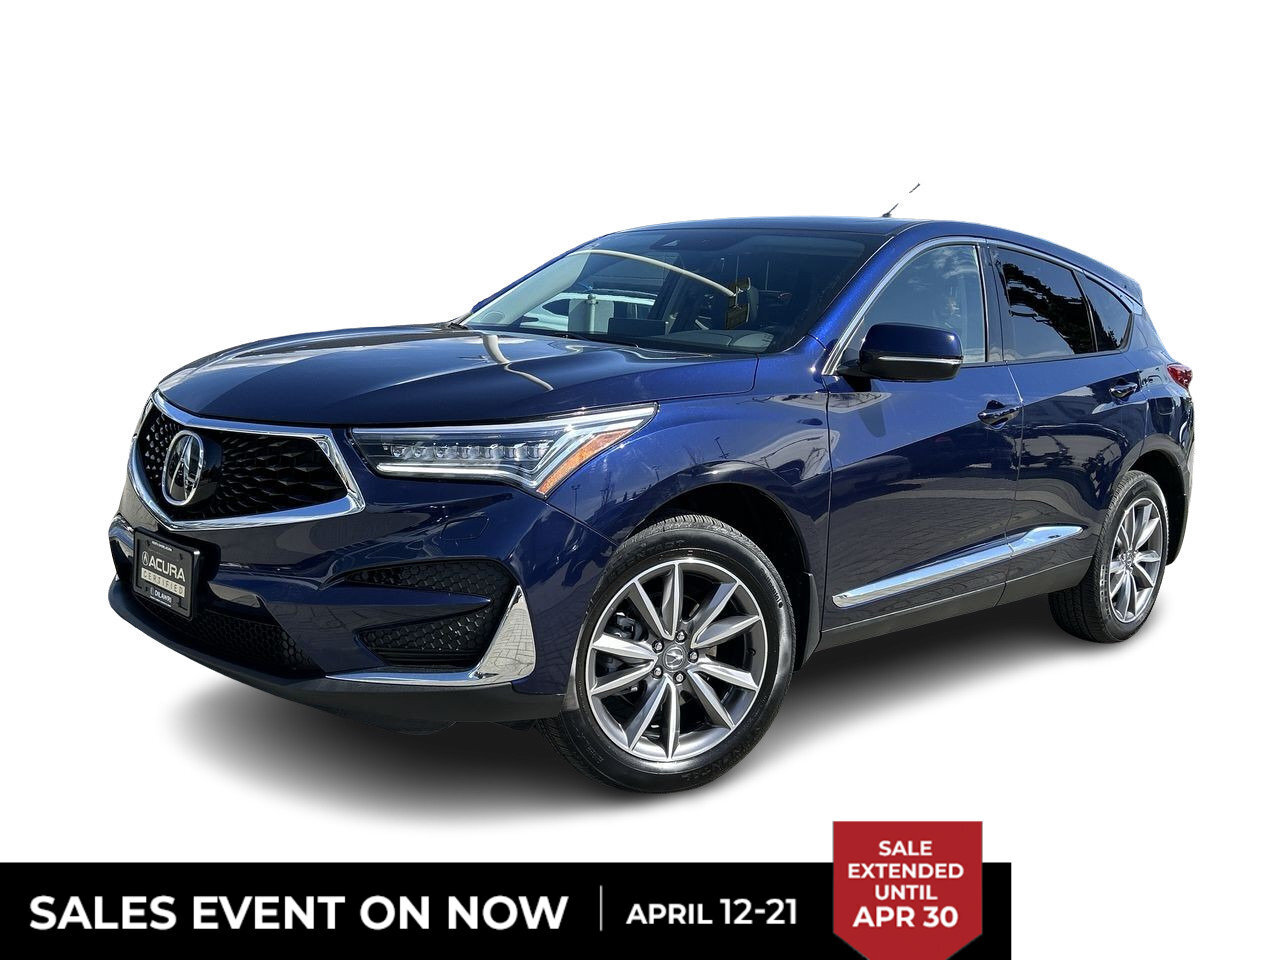 2021 Acura RDX SH-AWD Elite at ** One owner, Leather, AWD, Pano R